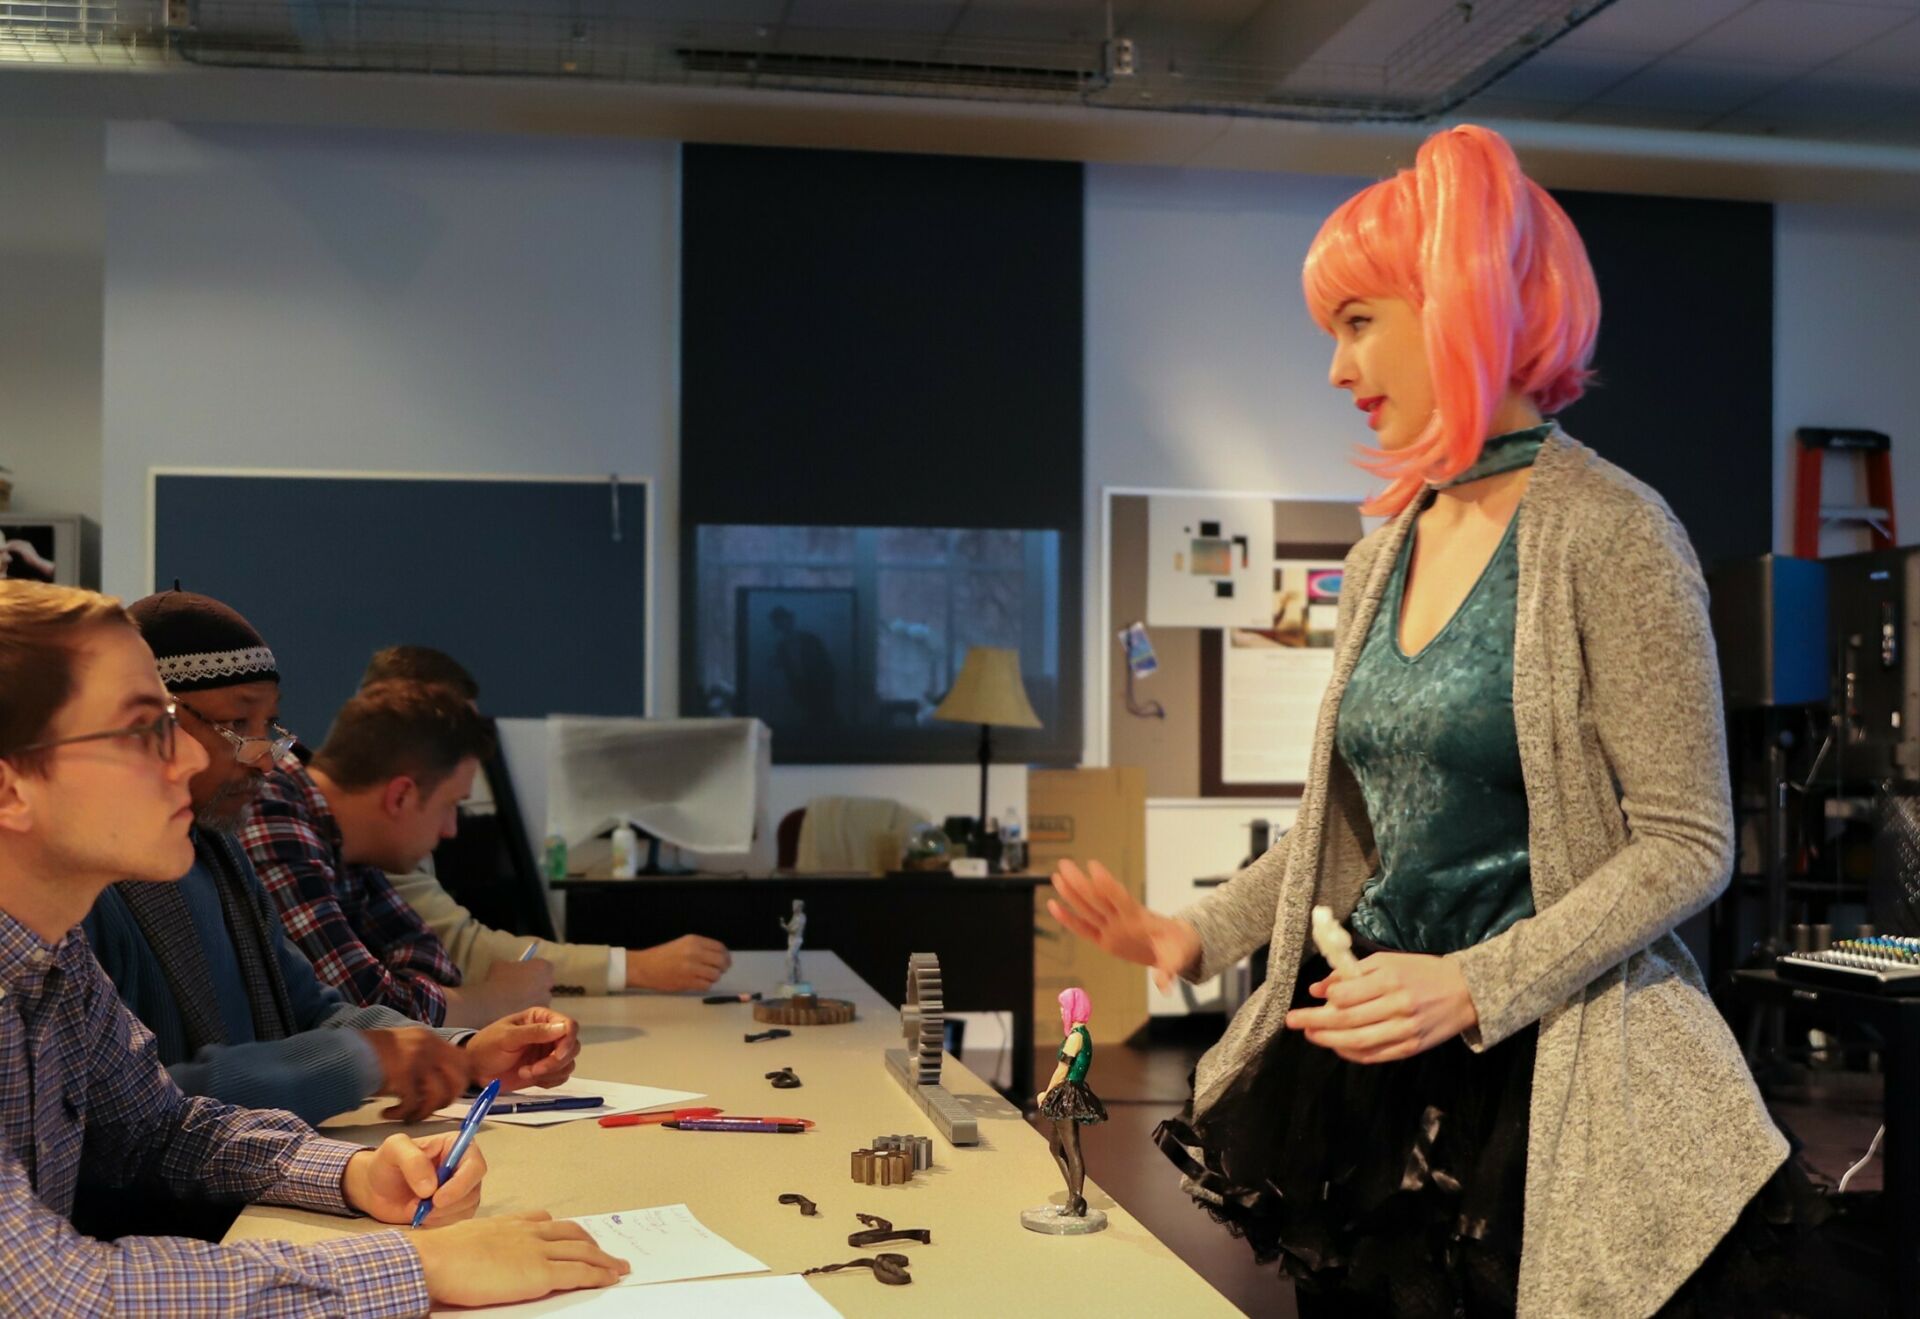 A student presents her 3d model figurine concept to a panel of judges during the Arts Business Ideas Competition. Mimicking the look of her 3d model, she wears a pink ponytail wig and vibrant outfit.